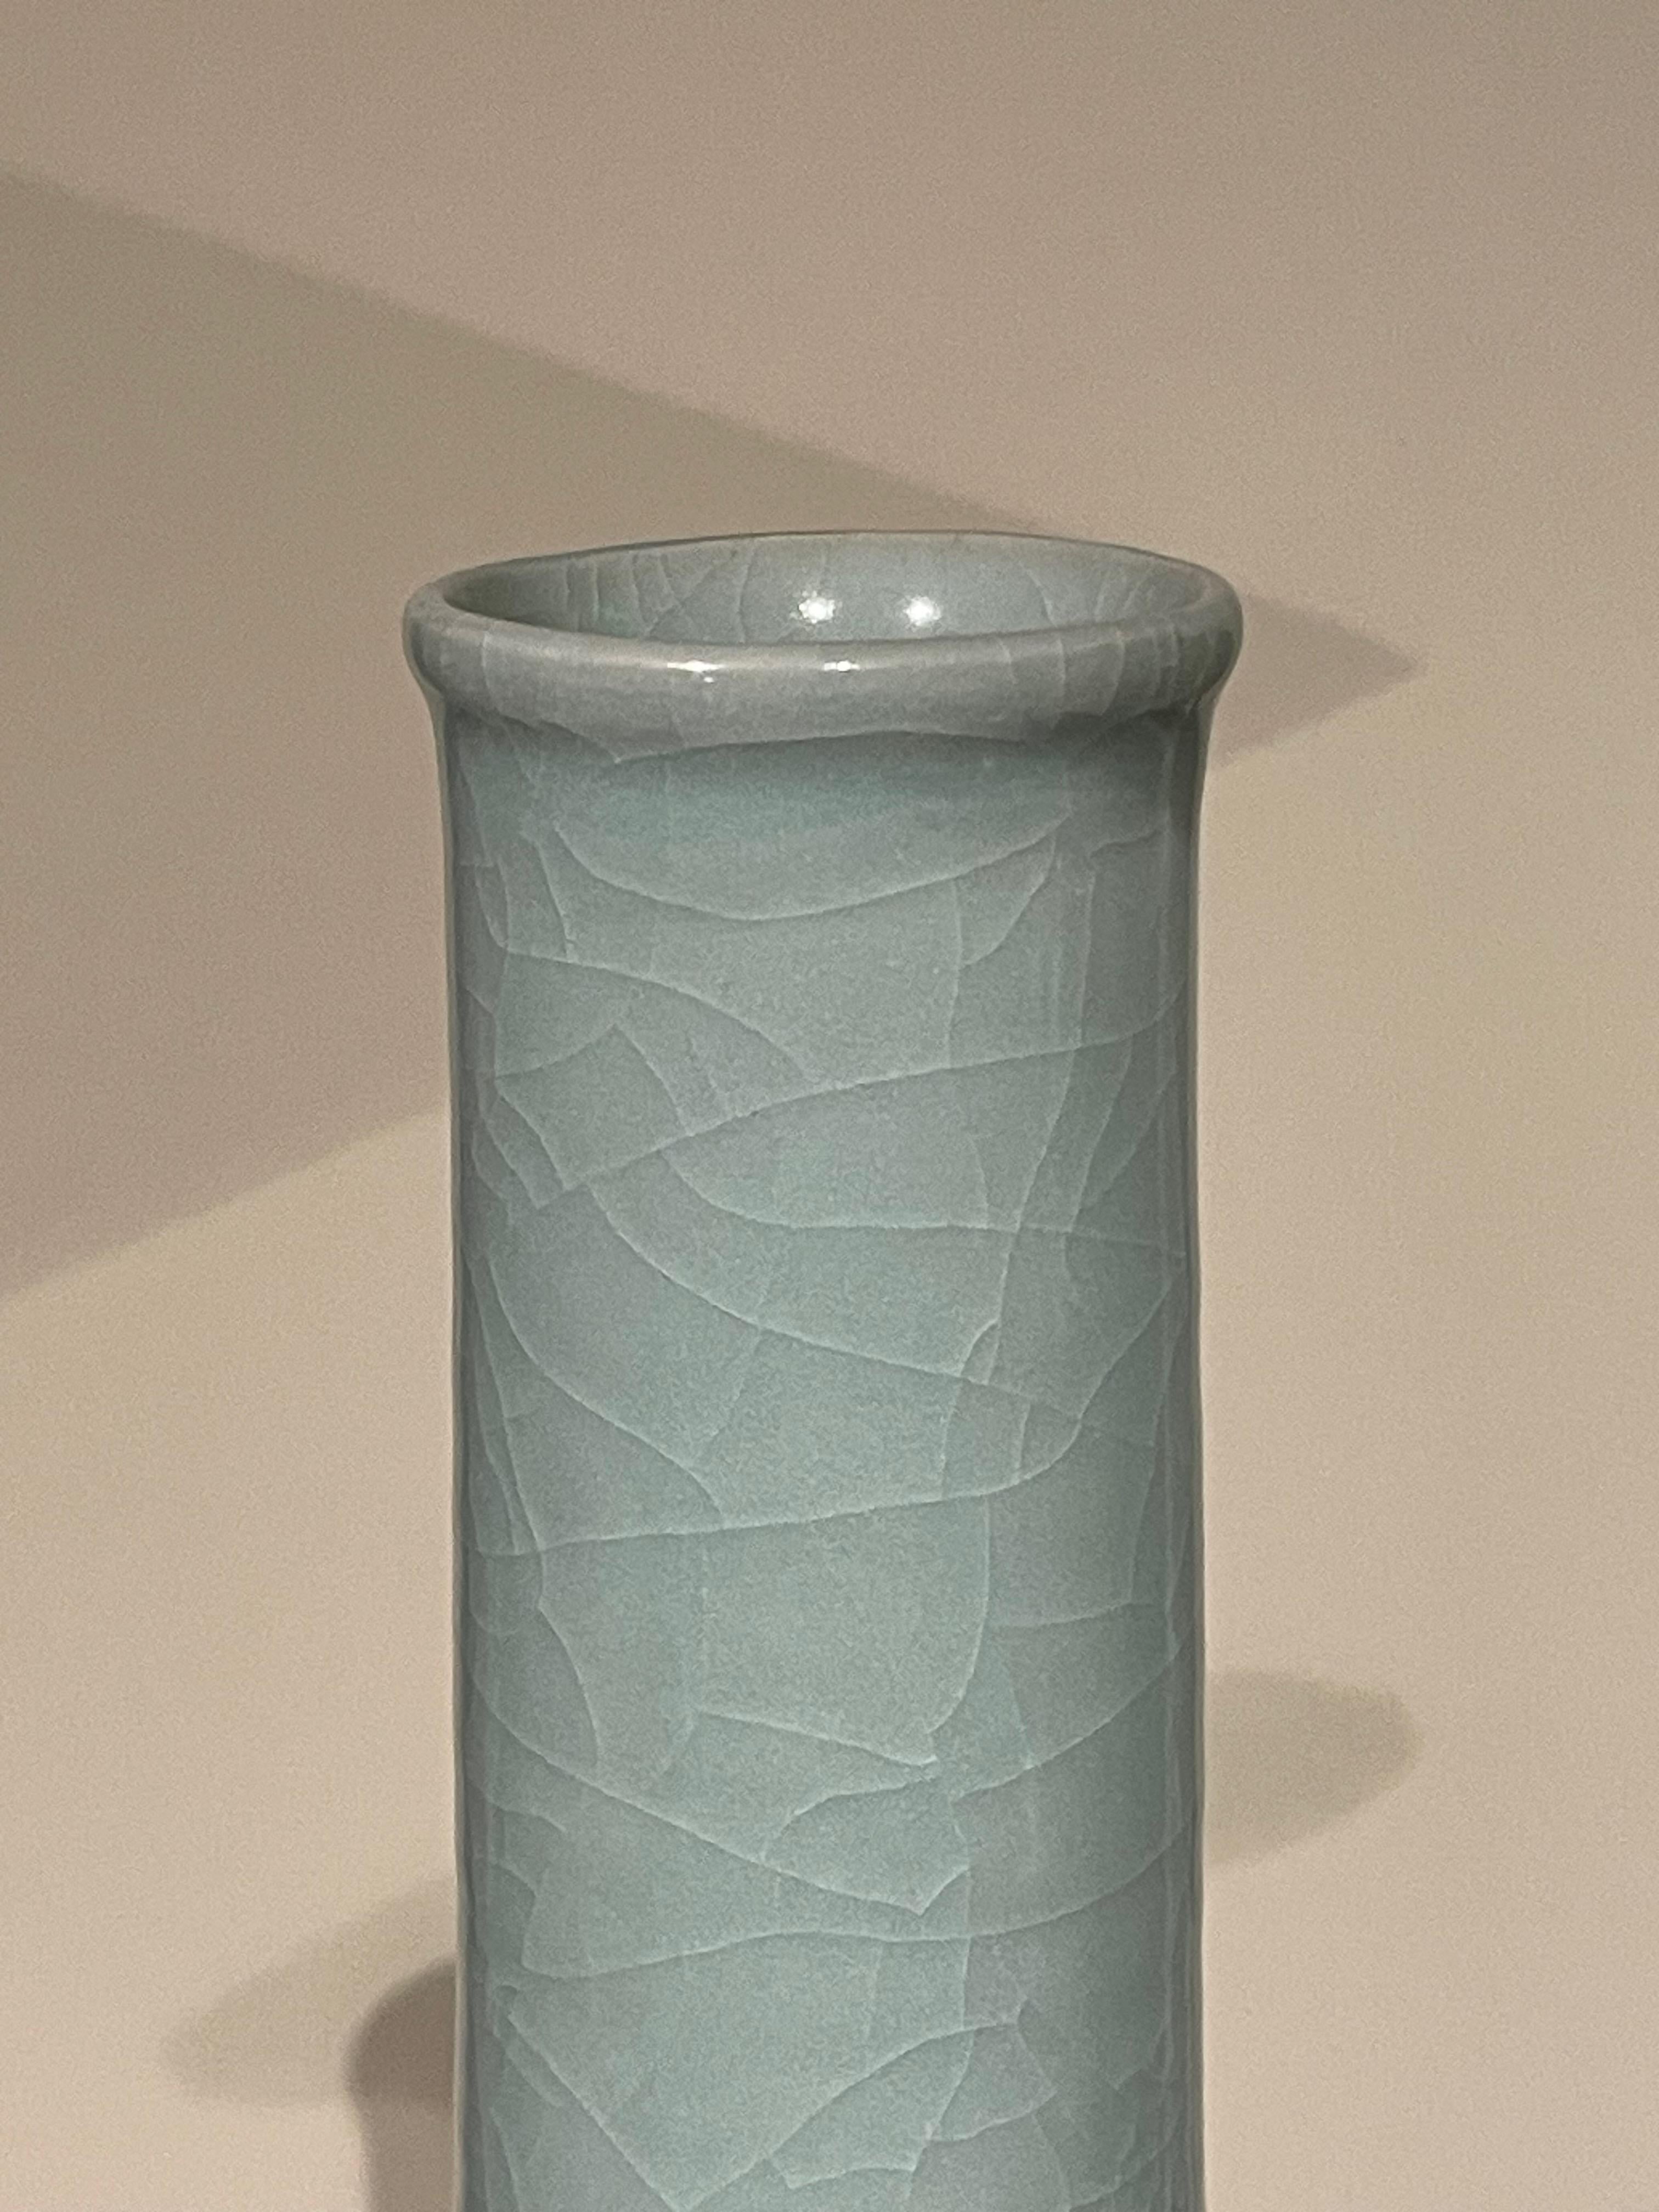 Contemporary Chinese pale turquoise vase.
Funnel neck design.
Large collection available with varying sizes and shapes.
ARRIVING APRIL